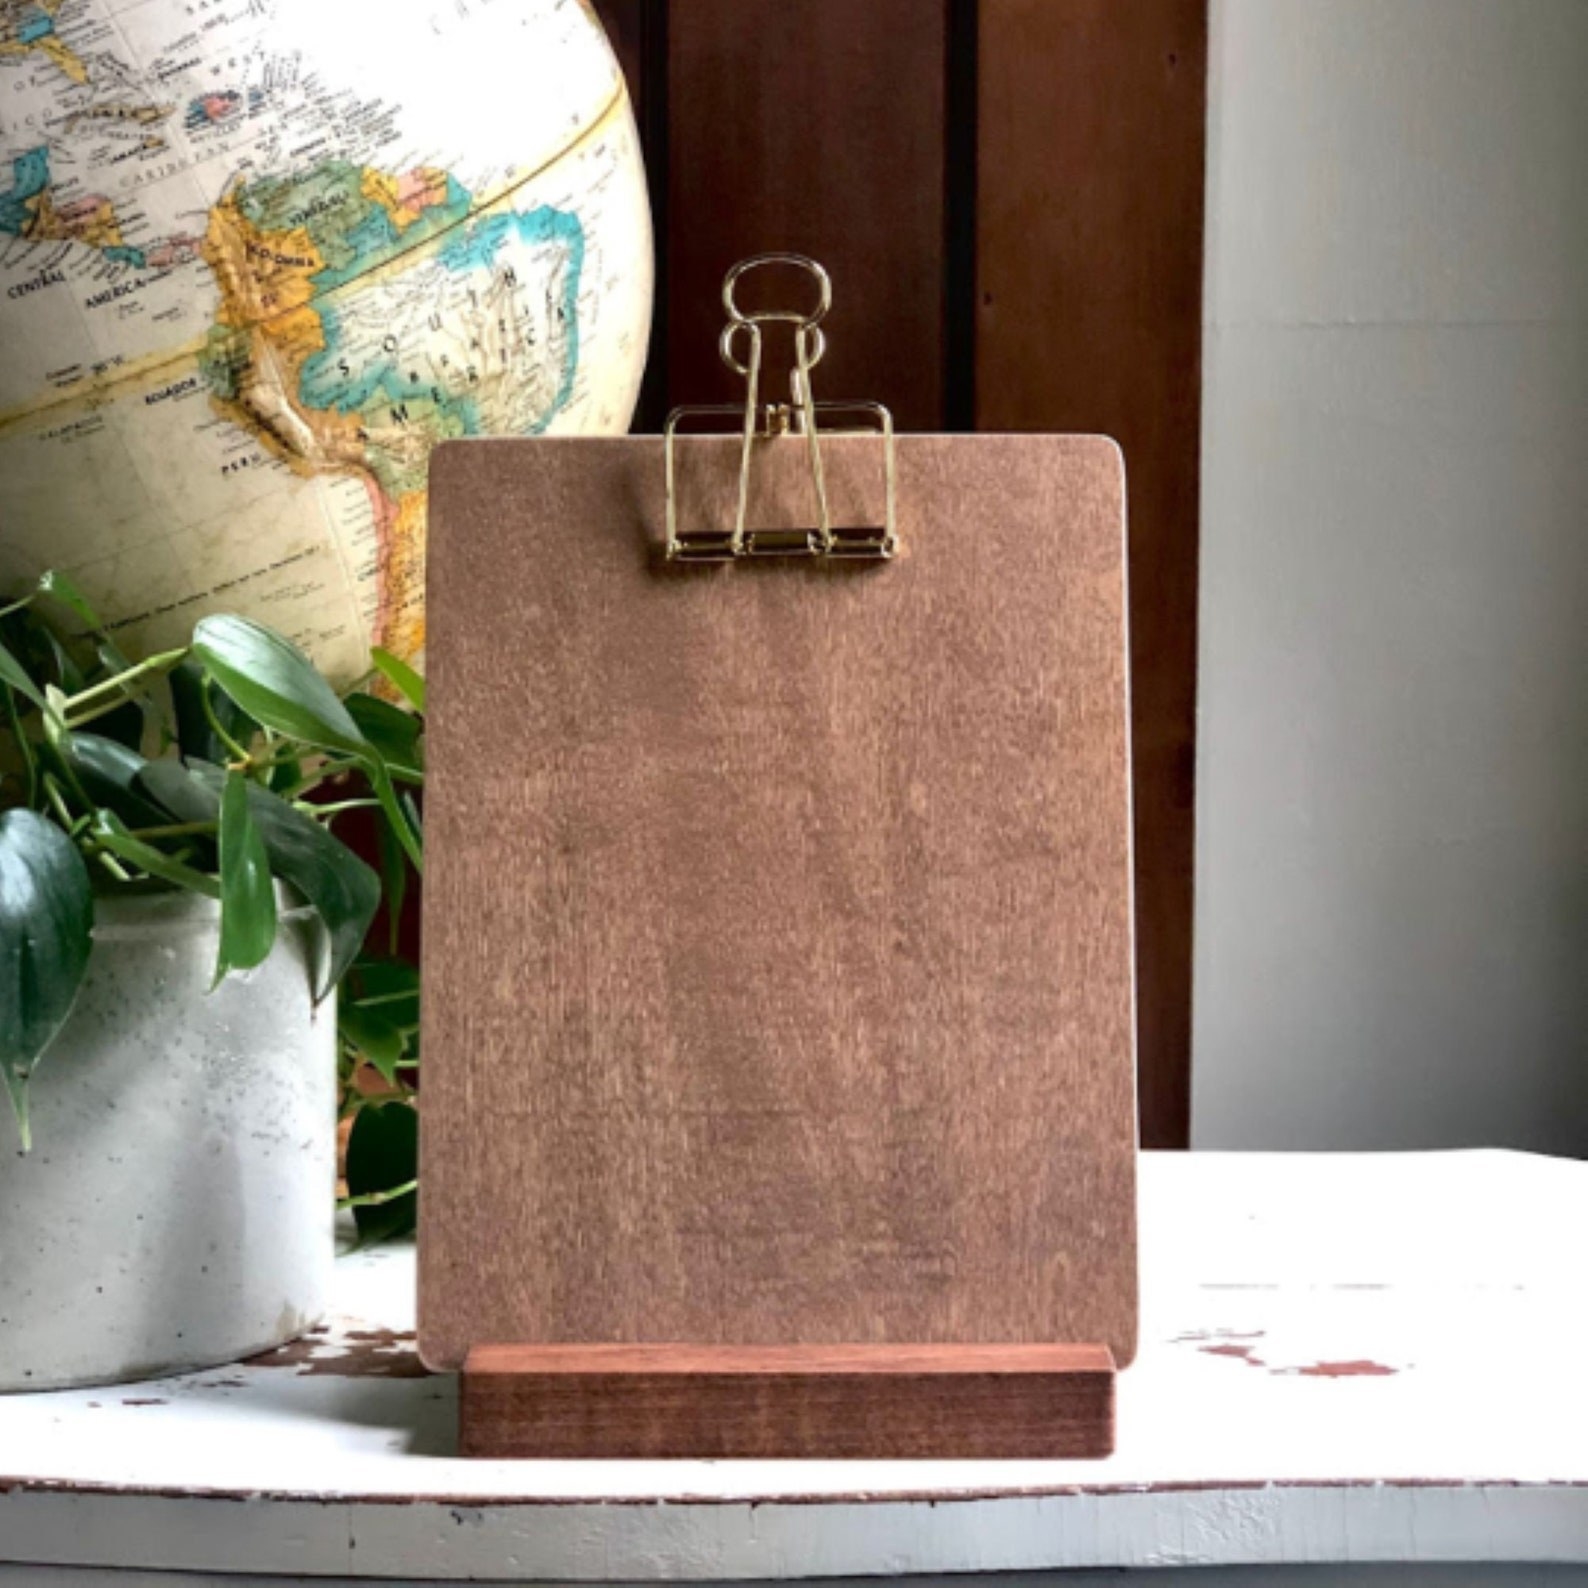 The rectangle-shaped clipboard with gold tone clip at top